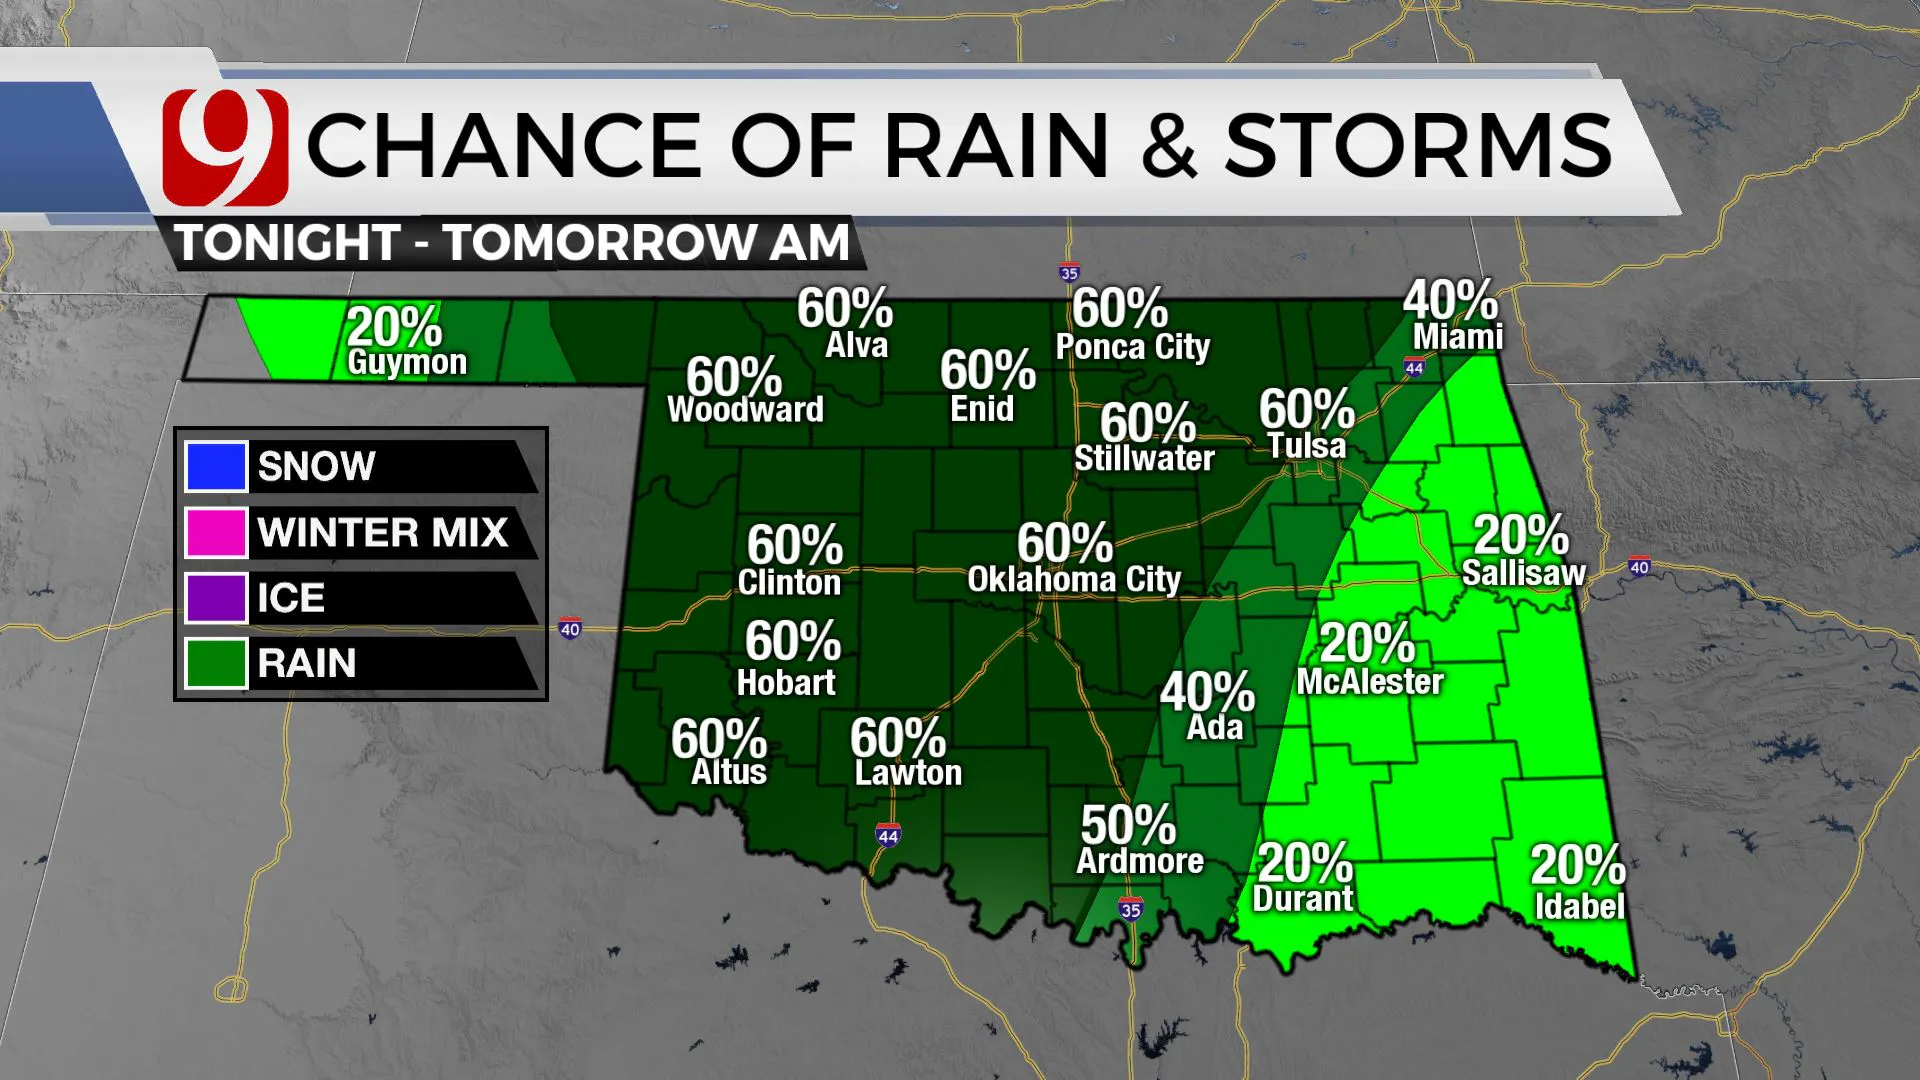 Chances of train and storms on Tuesday.